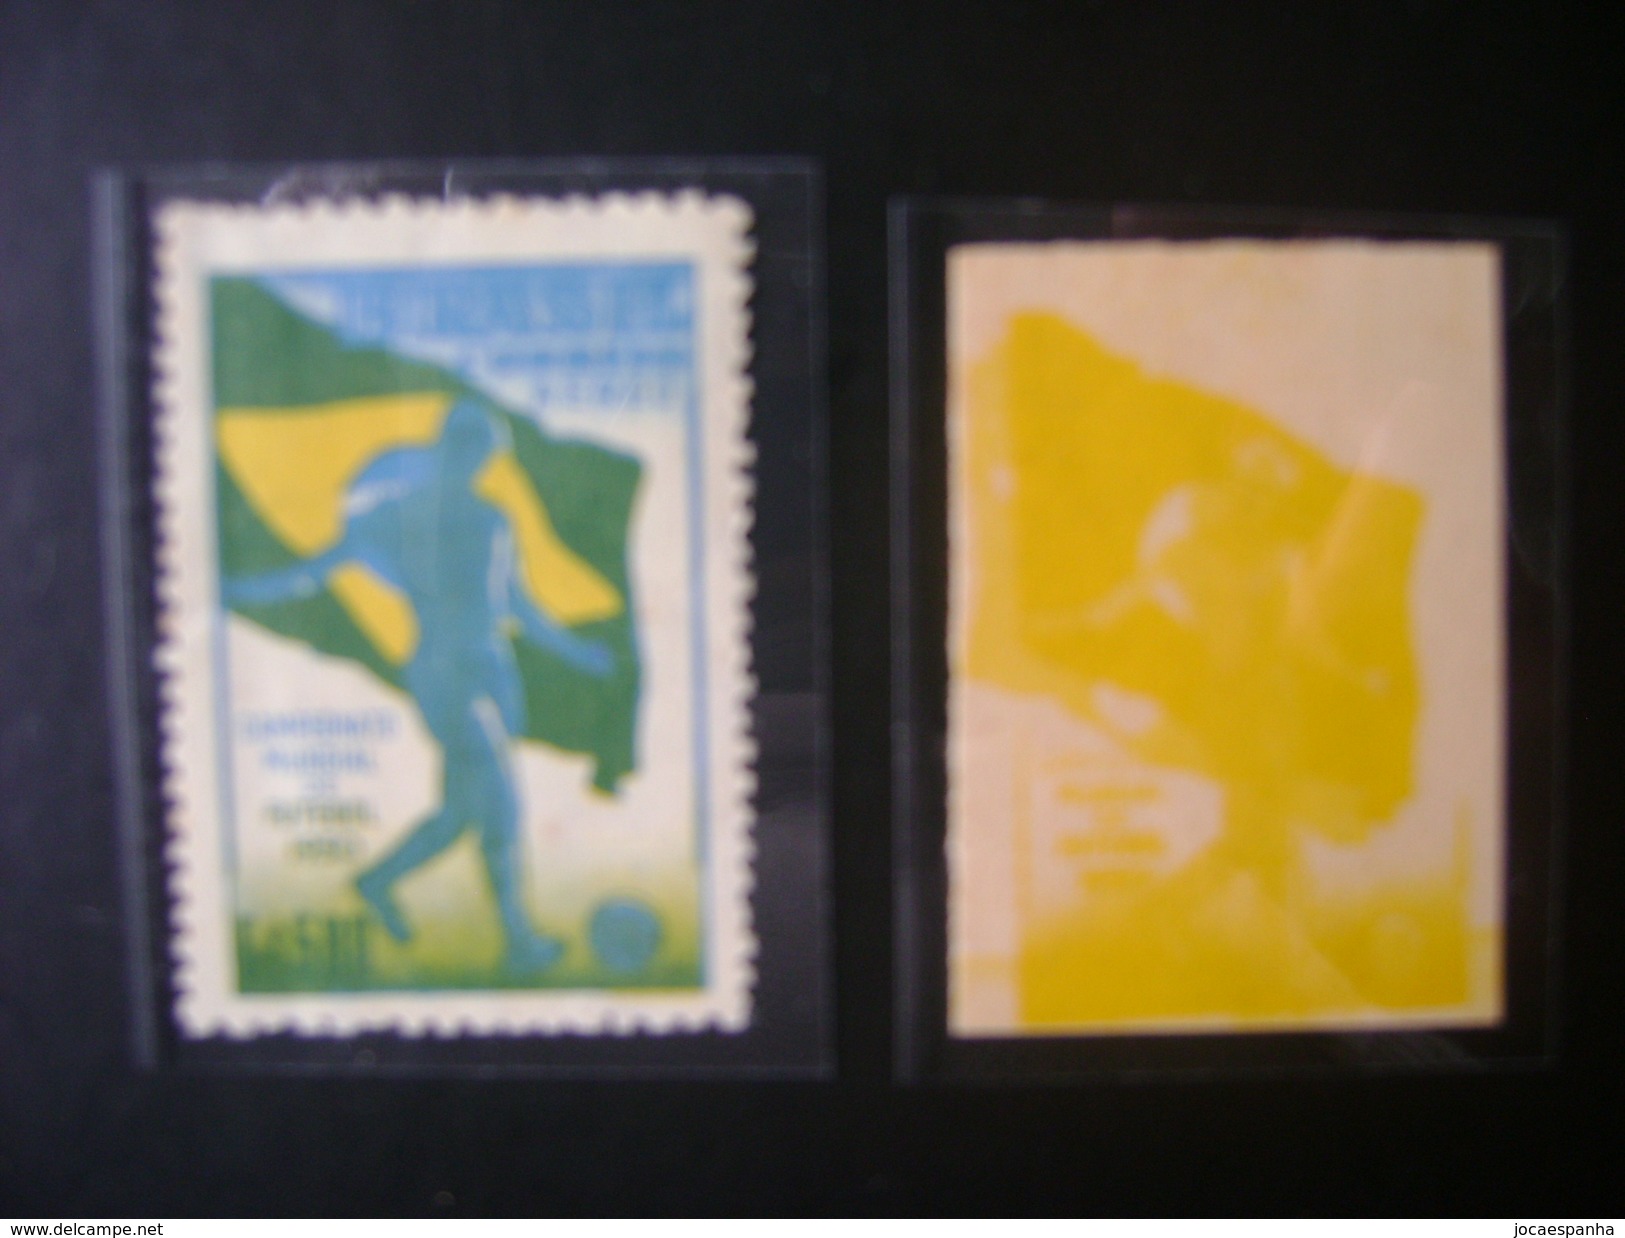 WORLD CUP OF FOOTBALL IN BRAZIL 1950 - A-76, PROOF YELLOW COLOR WITH DISPLACEMENT IN THE STATE - 1950 – Brasilien